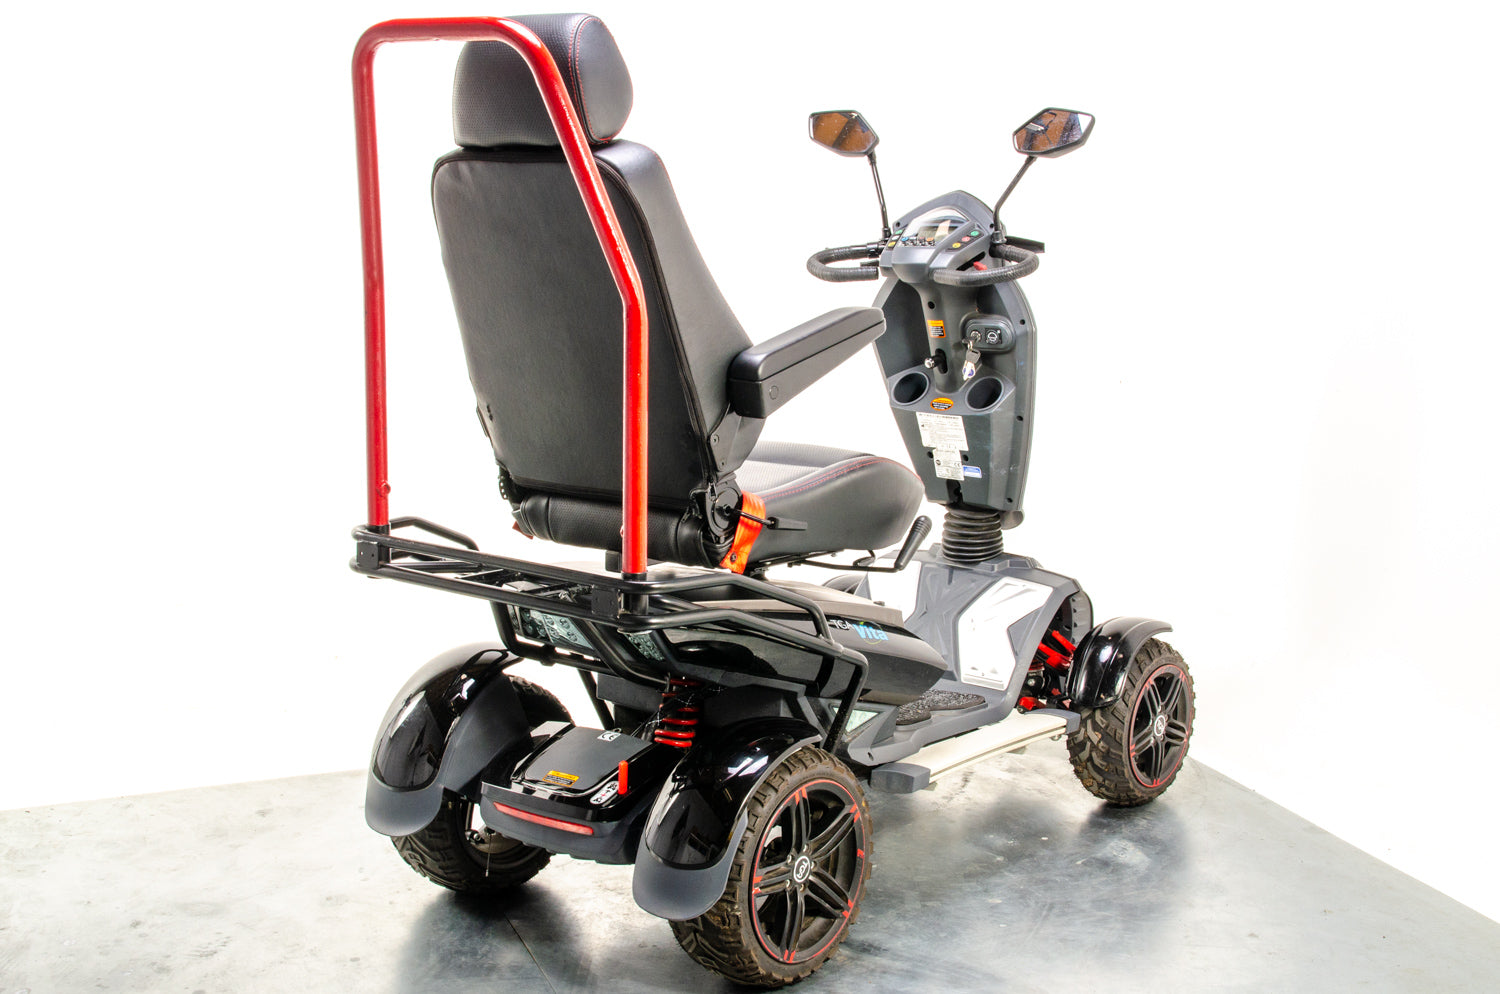 TGA Vita X Used Mobility Scooter 8mph All-Terrain Off-Road Large Road Legal 13353